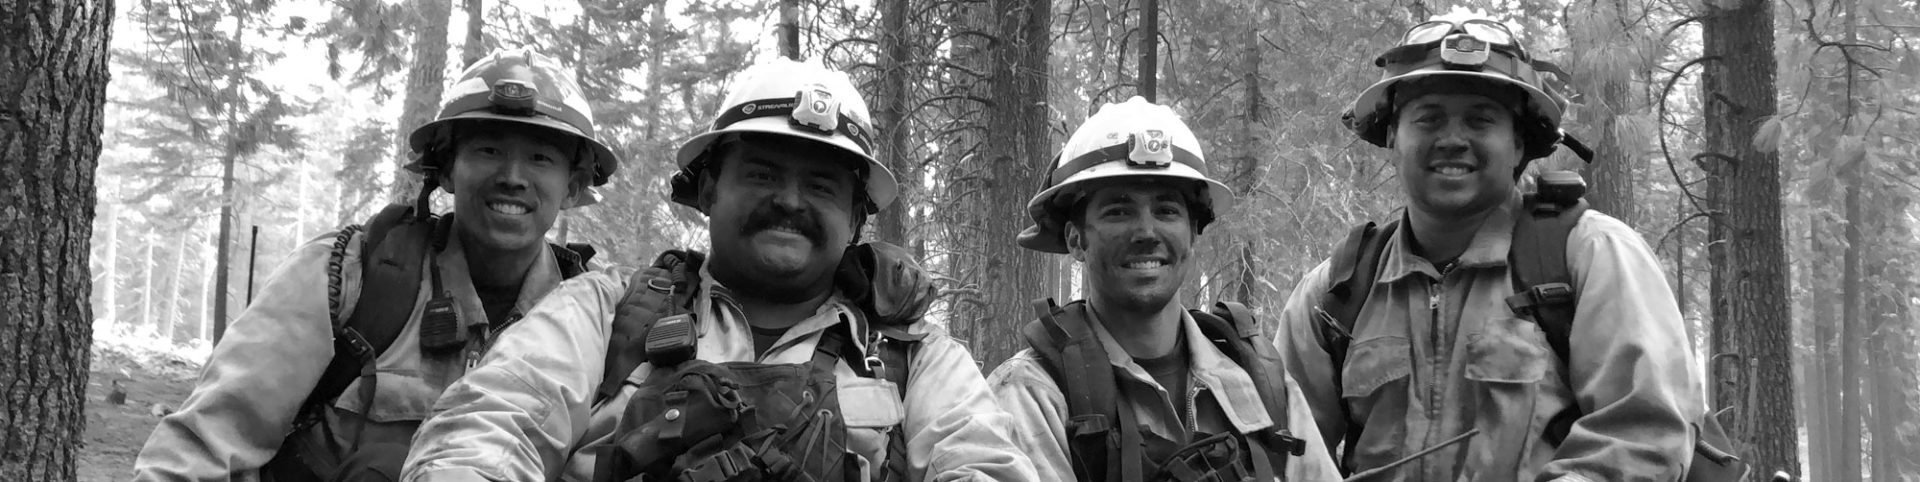 photo of four fire fighters in forest smiling